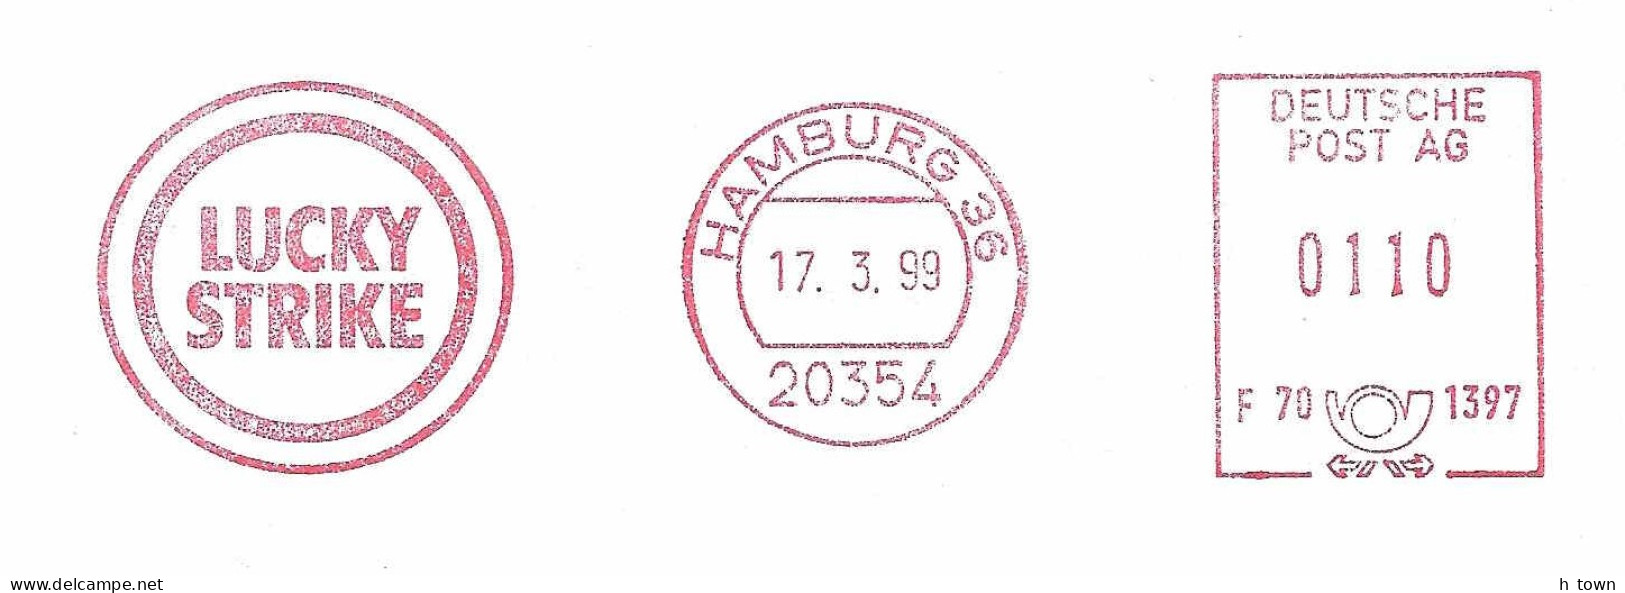 125  Tabac, Cigarette Lucky Strike: Ema D'Allemagne, 1999 - Tobacco Meter Stamp From Hamburg, Germany - Drugs